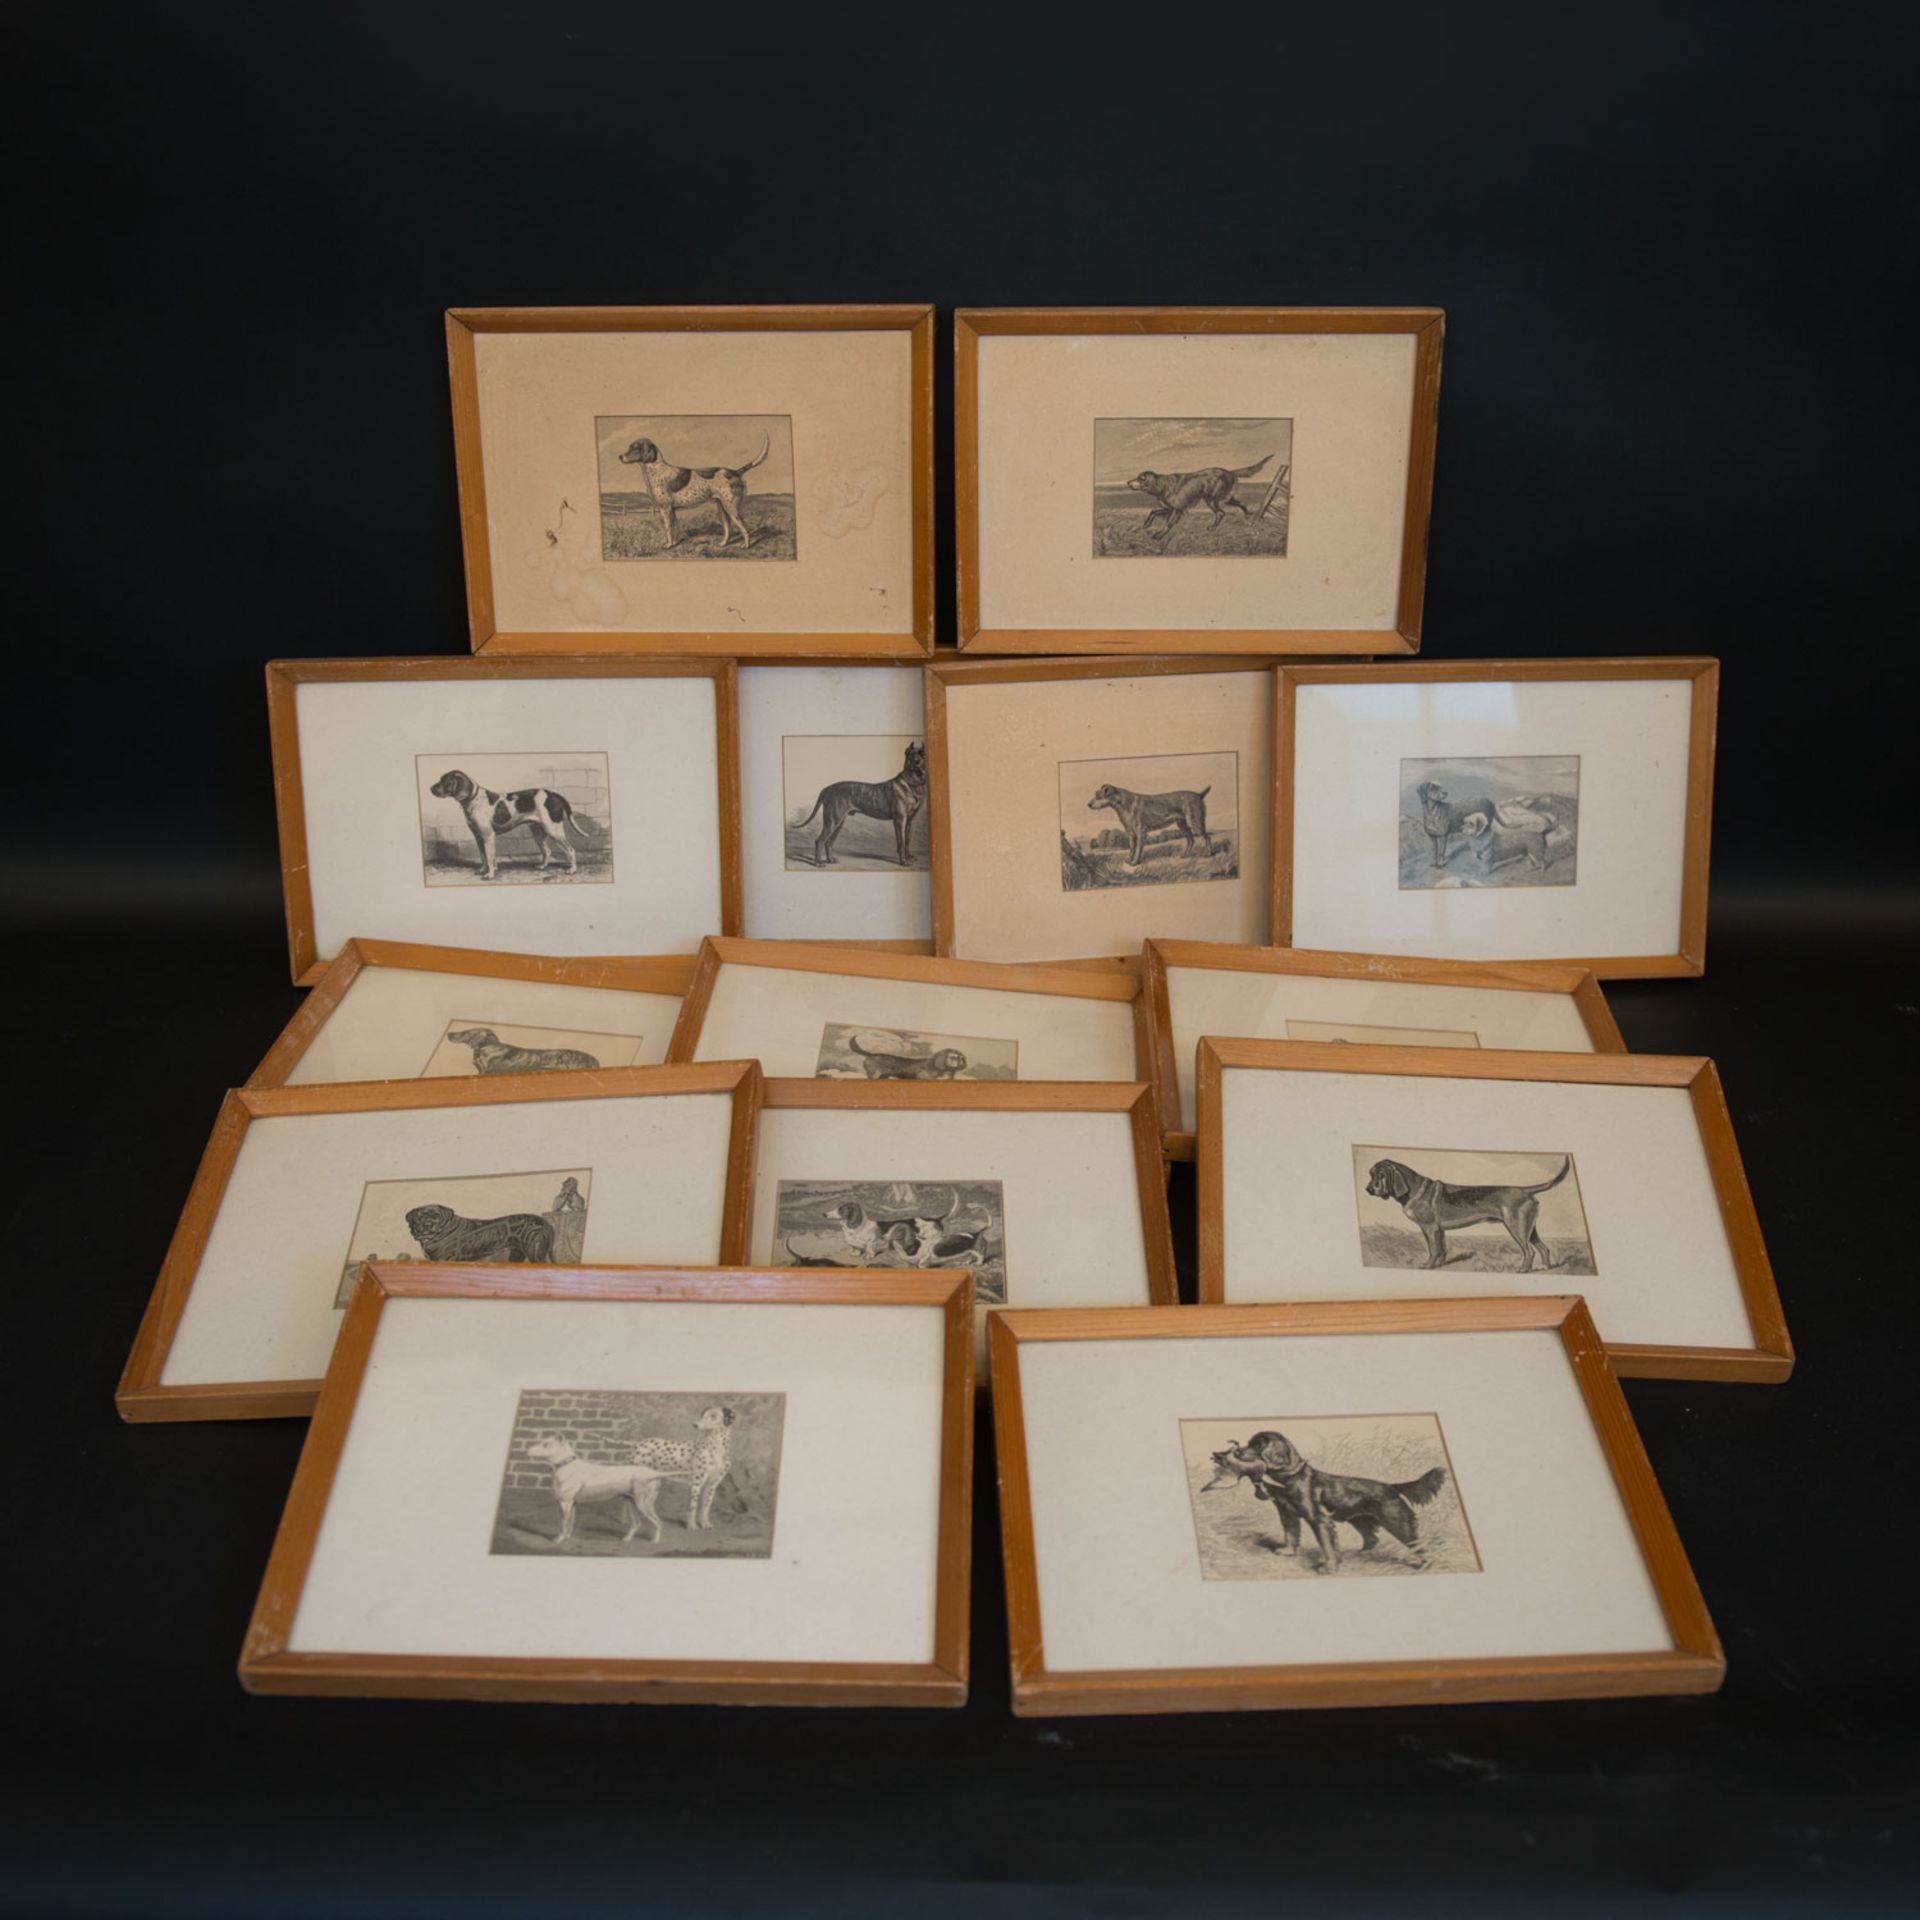 Pollak Collection of 16 Dog Lithographies